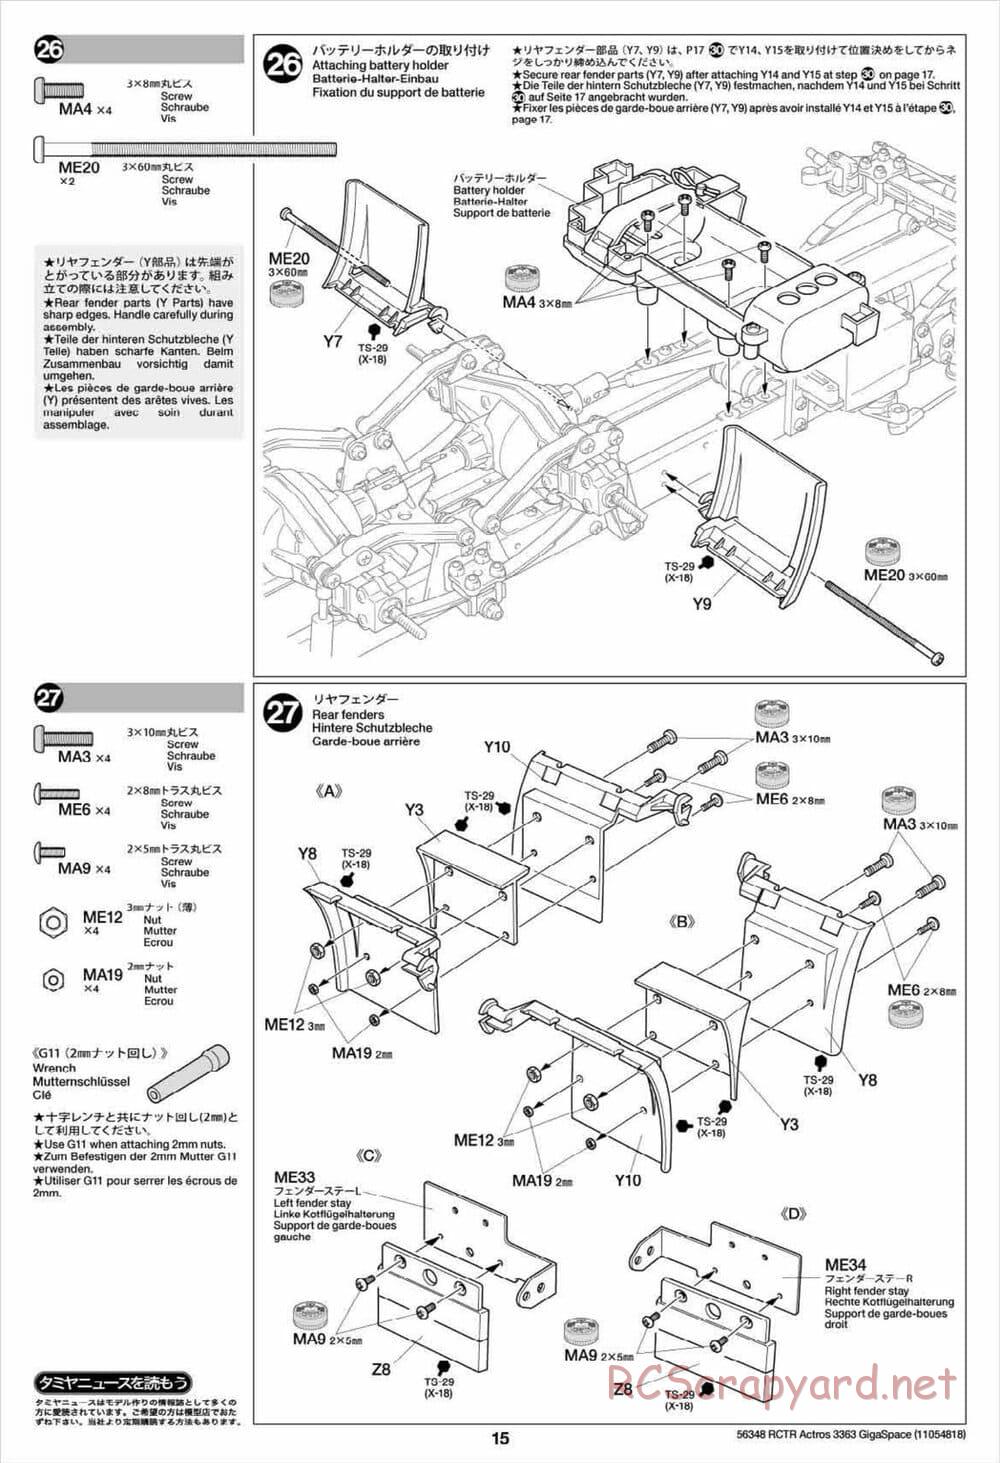 Tamiya - Mercedes-Benz Actros 3363 6x4 GigaSpace Tractor Truck Chassis - Manual - Page 15